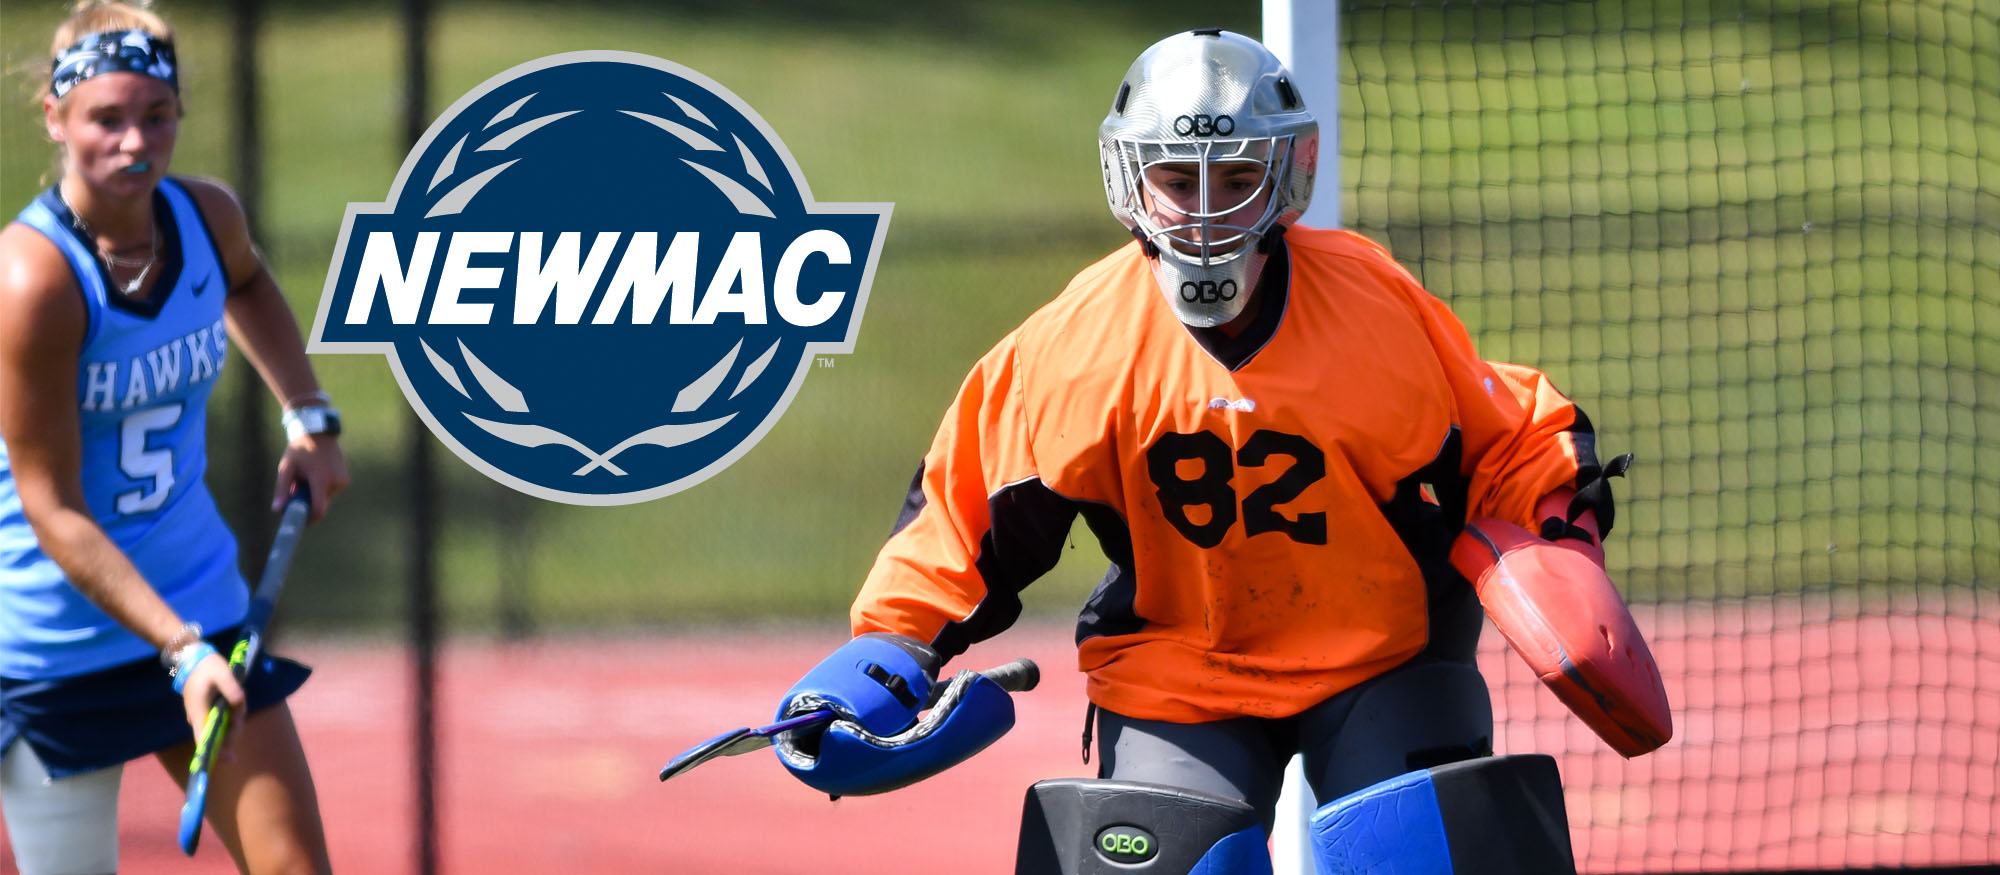 Turner Collects NEWMAC Field Hockey Defensive Athlete of the Week Honors